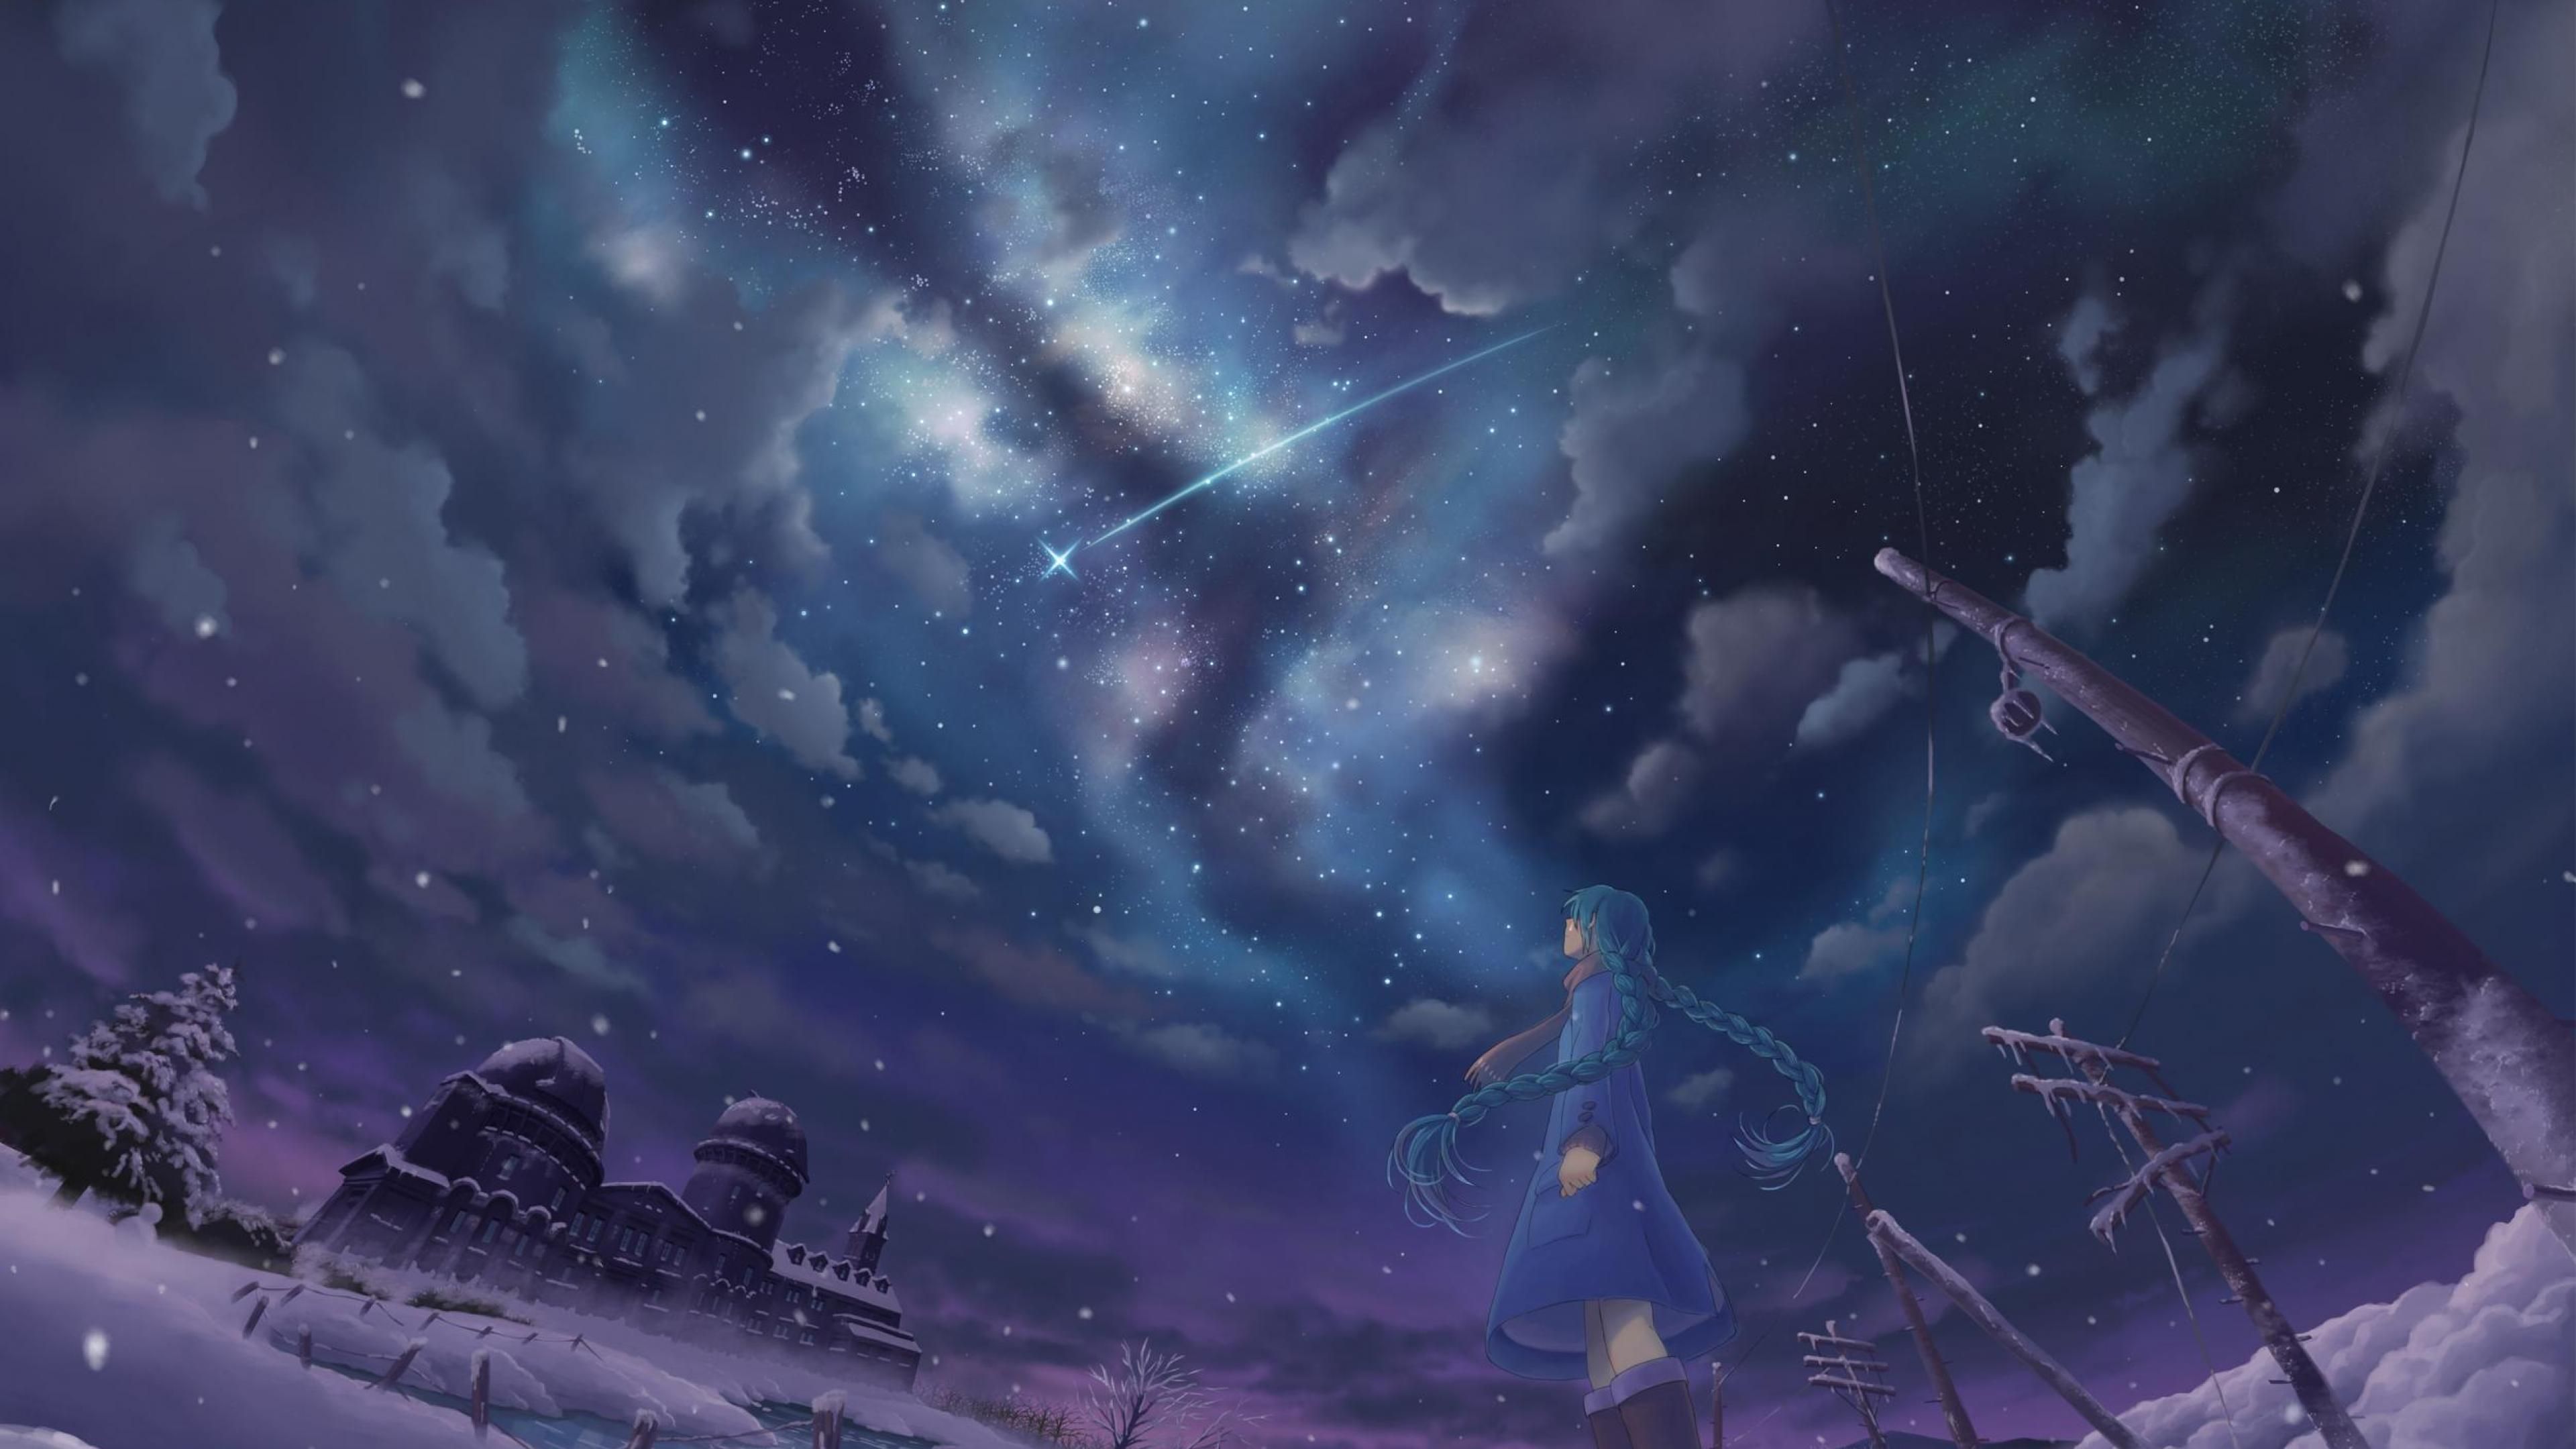 Anime Girls Blue Hair Twintails Long Hair Coats Low Angle Snow Starry Night Clouds Shooting Stars Wi 3840x2160